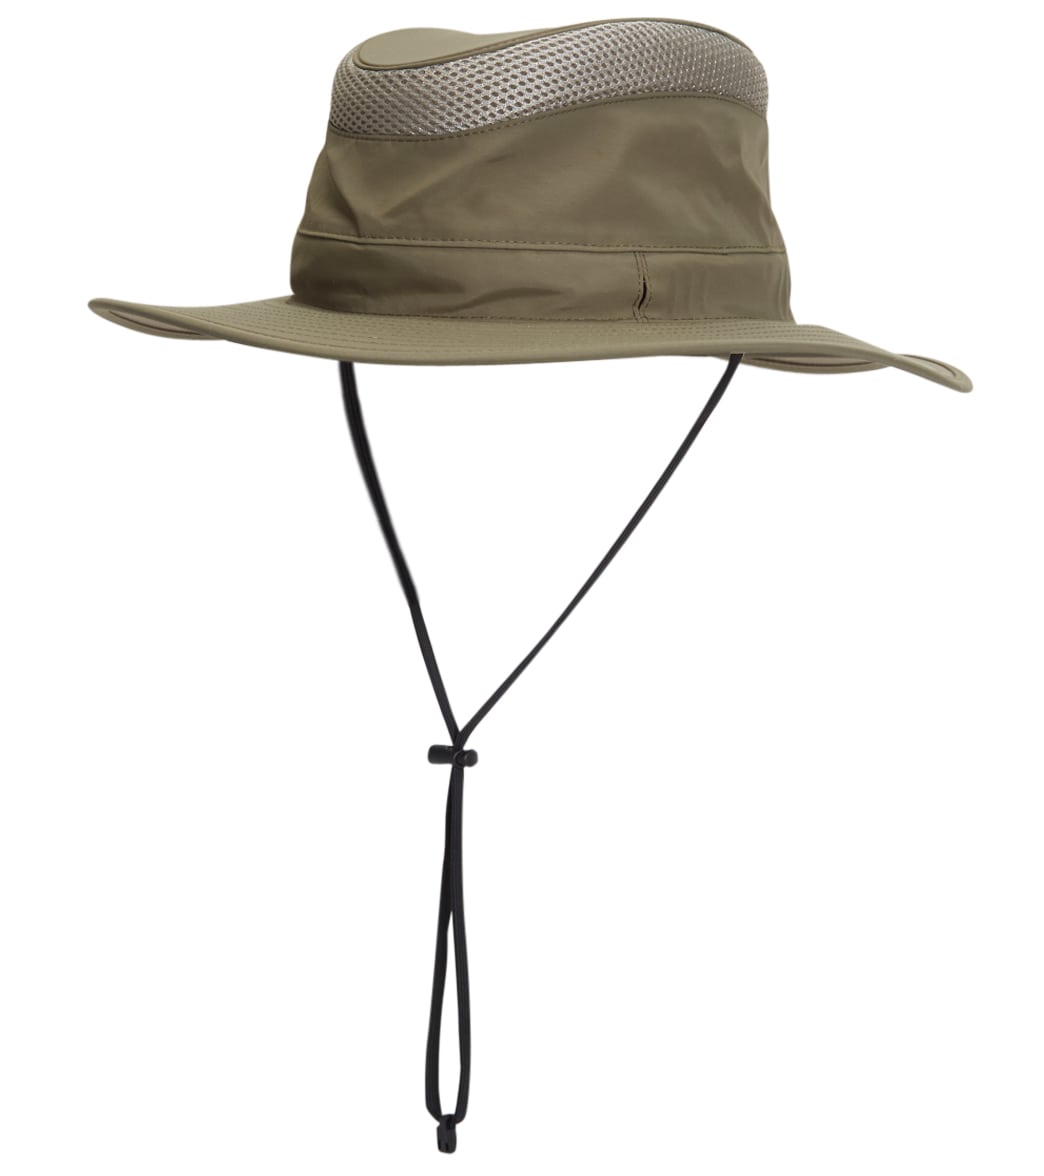 Sunday Afternoons Charter Hat - Chaparral Large - Swimoutlet.com